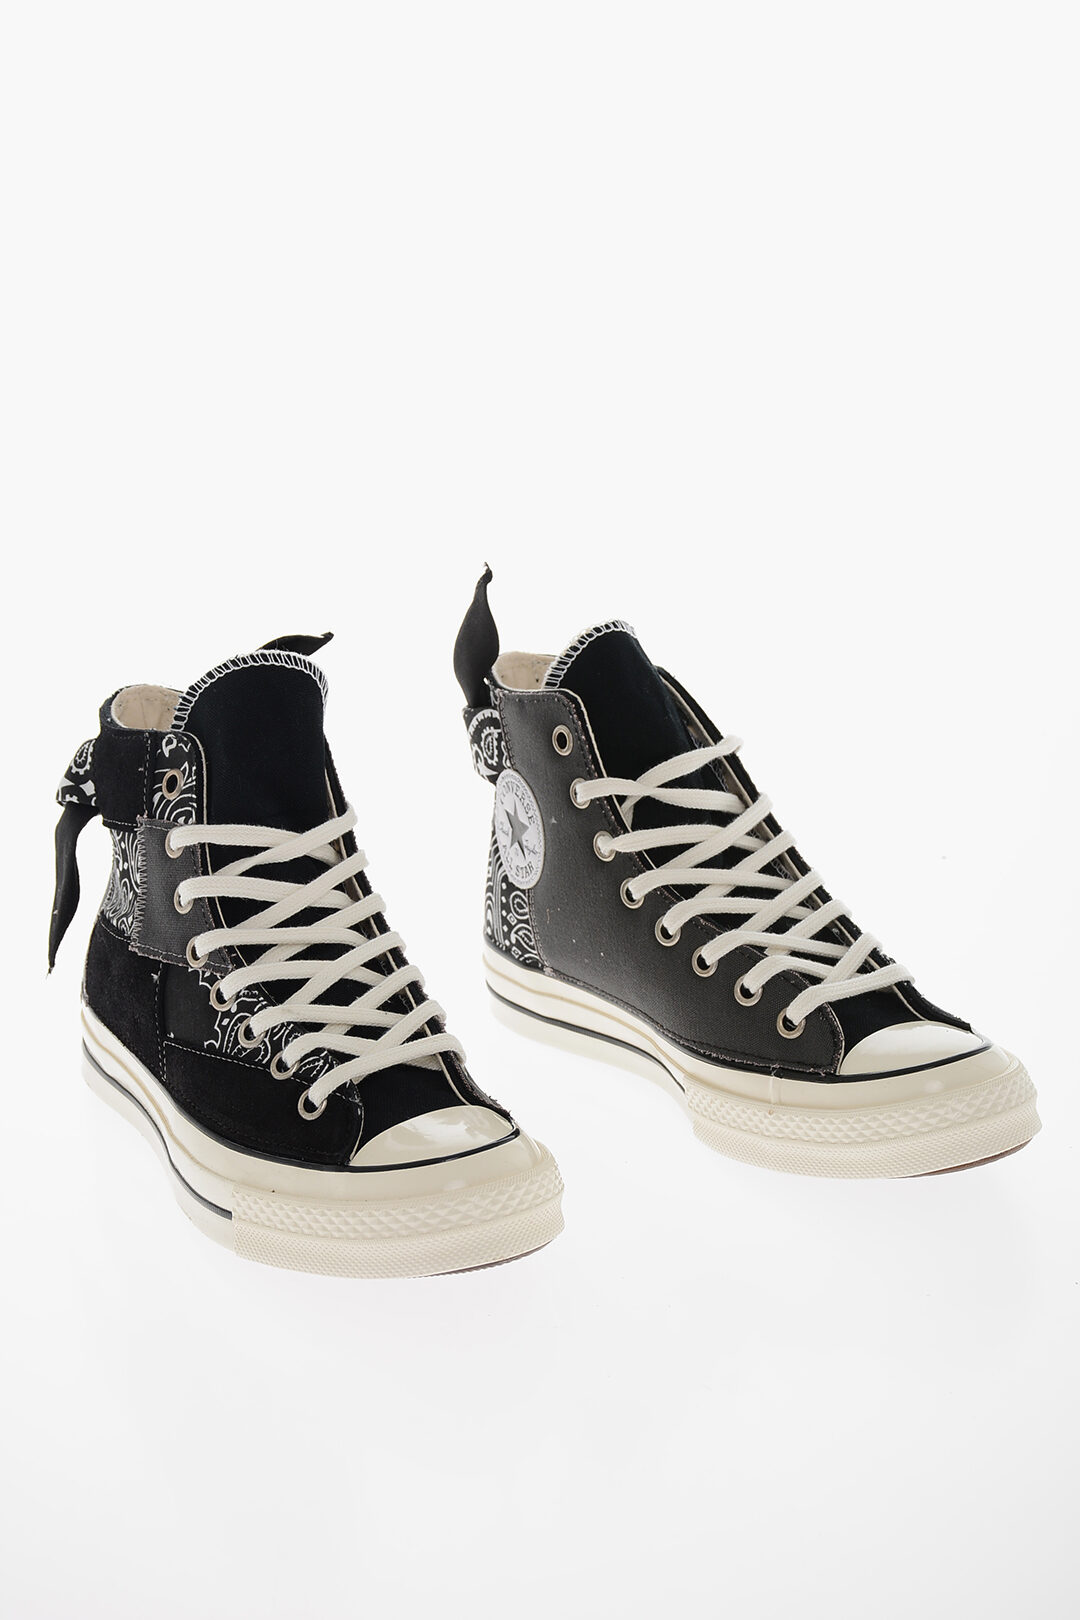 Converse CHUCK TAYLOR ALL STAR Bandana Motif Faux Suede High-Top Sneakers men - Outlet